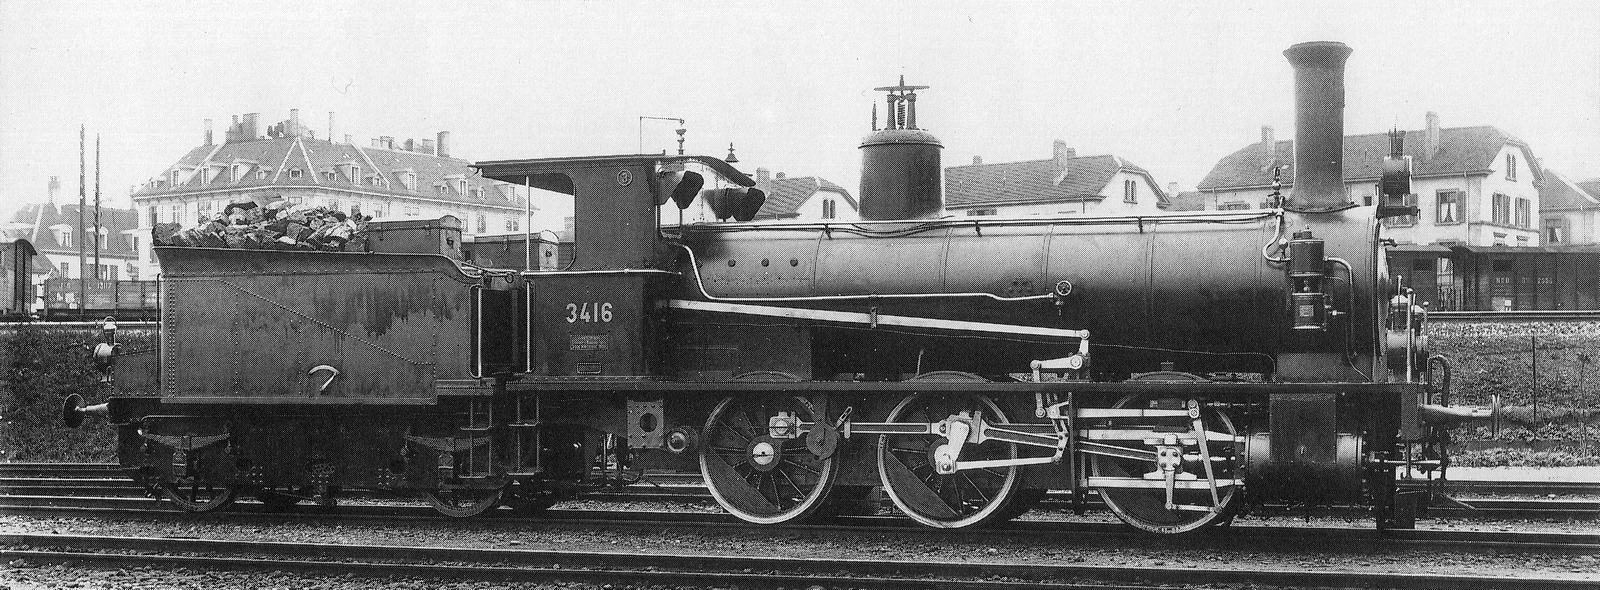 No. 3416 in the year 1903 in Zürich